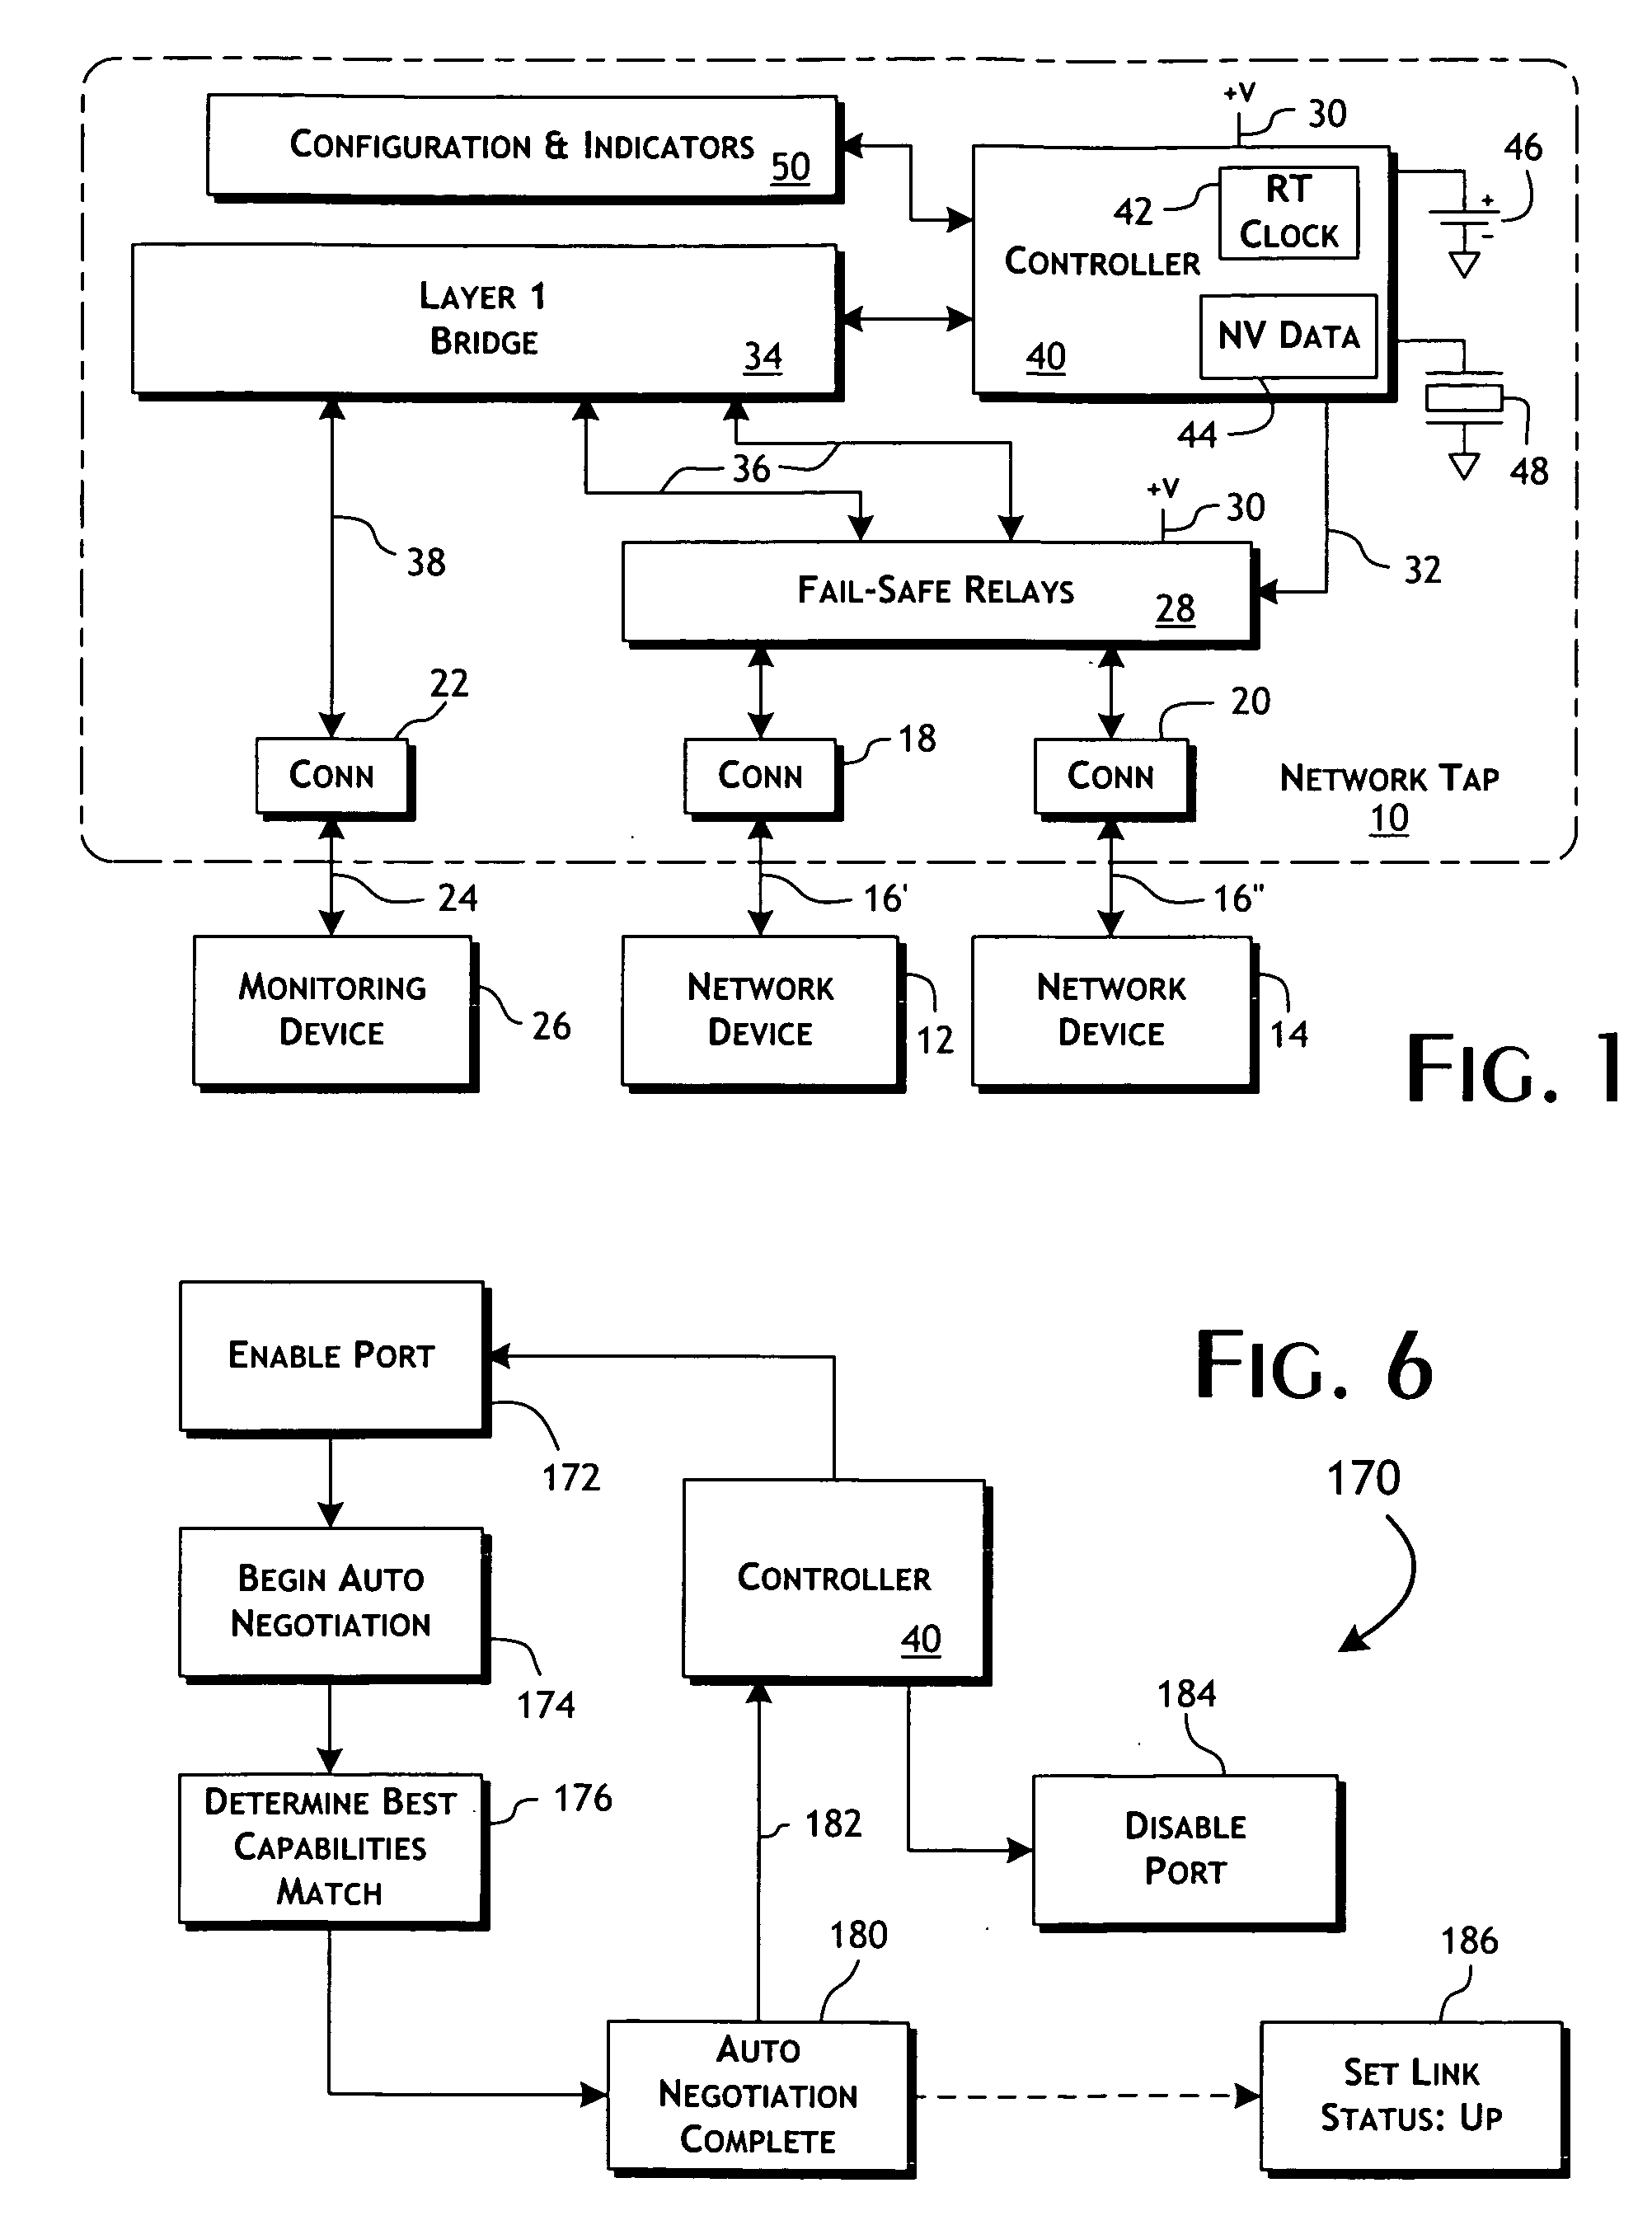 Intelligent fast switch-over network tap system and methods